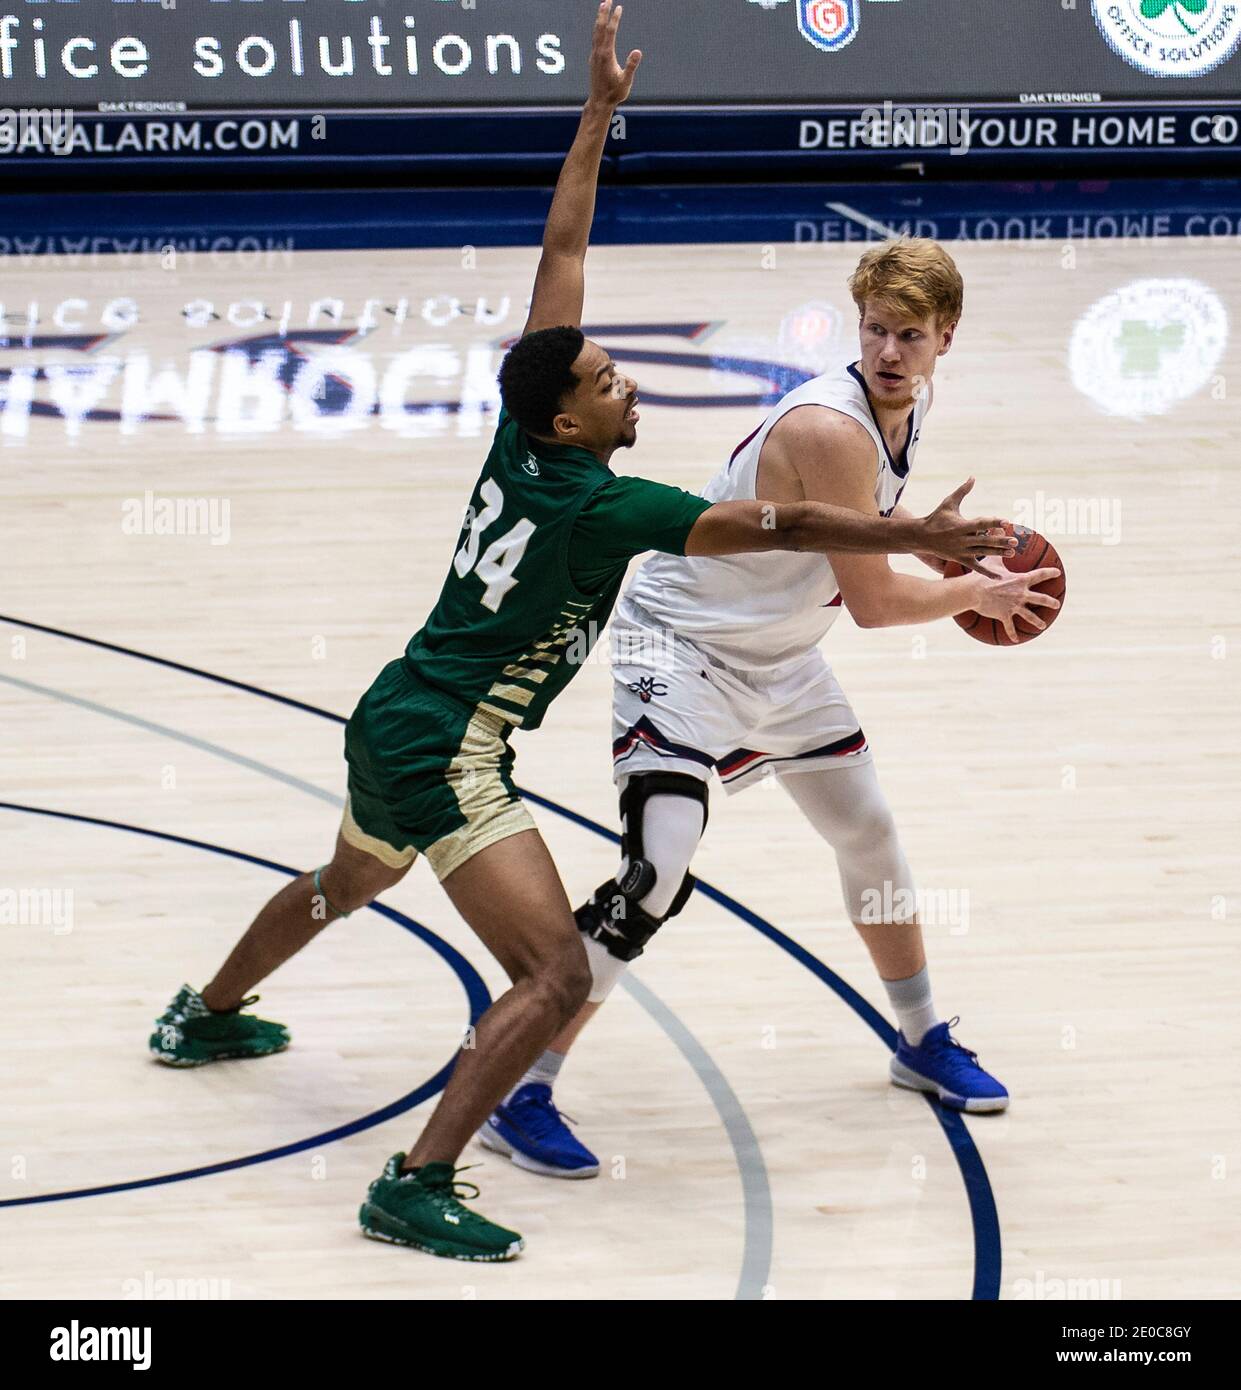 Moraga, CA U.S. 30th Dec, 2020. A. St. Mary's Gaels forward Matthias Tass (11) looks to pass the ball during the NCAA Men's Basketball game between Sacramento State Hornets and the Saint Mary's Gaels 63-45 win at McKeon Pavilion Moraga Calif. Thurman James/CSM/Alamy Live News Stock Photo